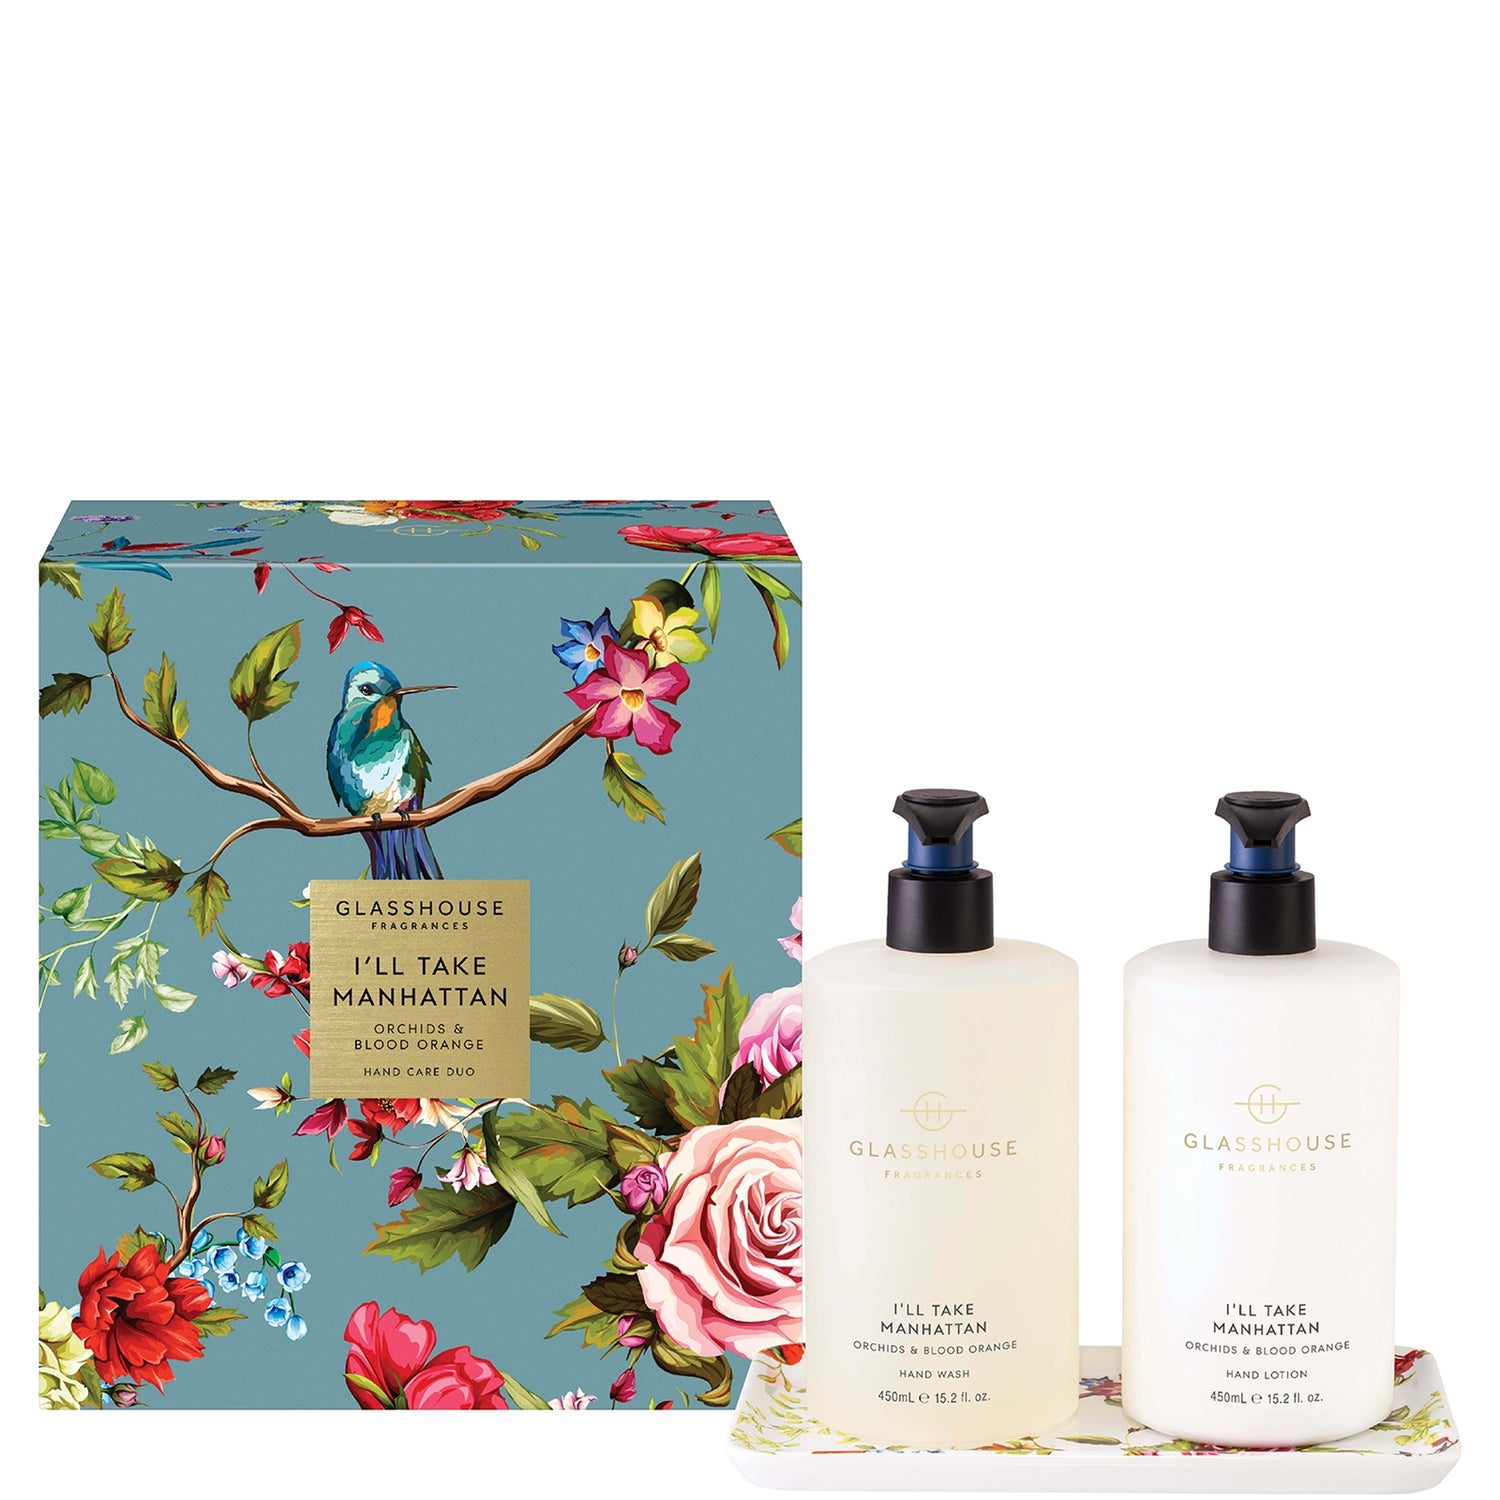 Glasshouse Fragrances I'll Take Manhattan Hand Lotion and Hand Wash Duo 450ml Gift Set